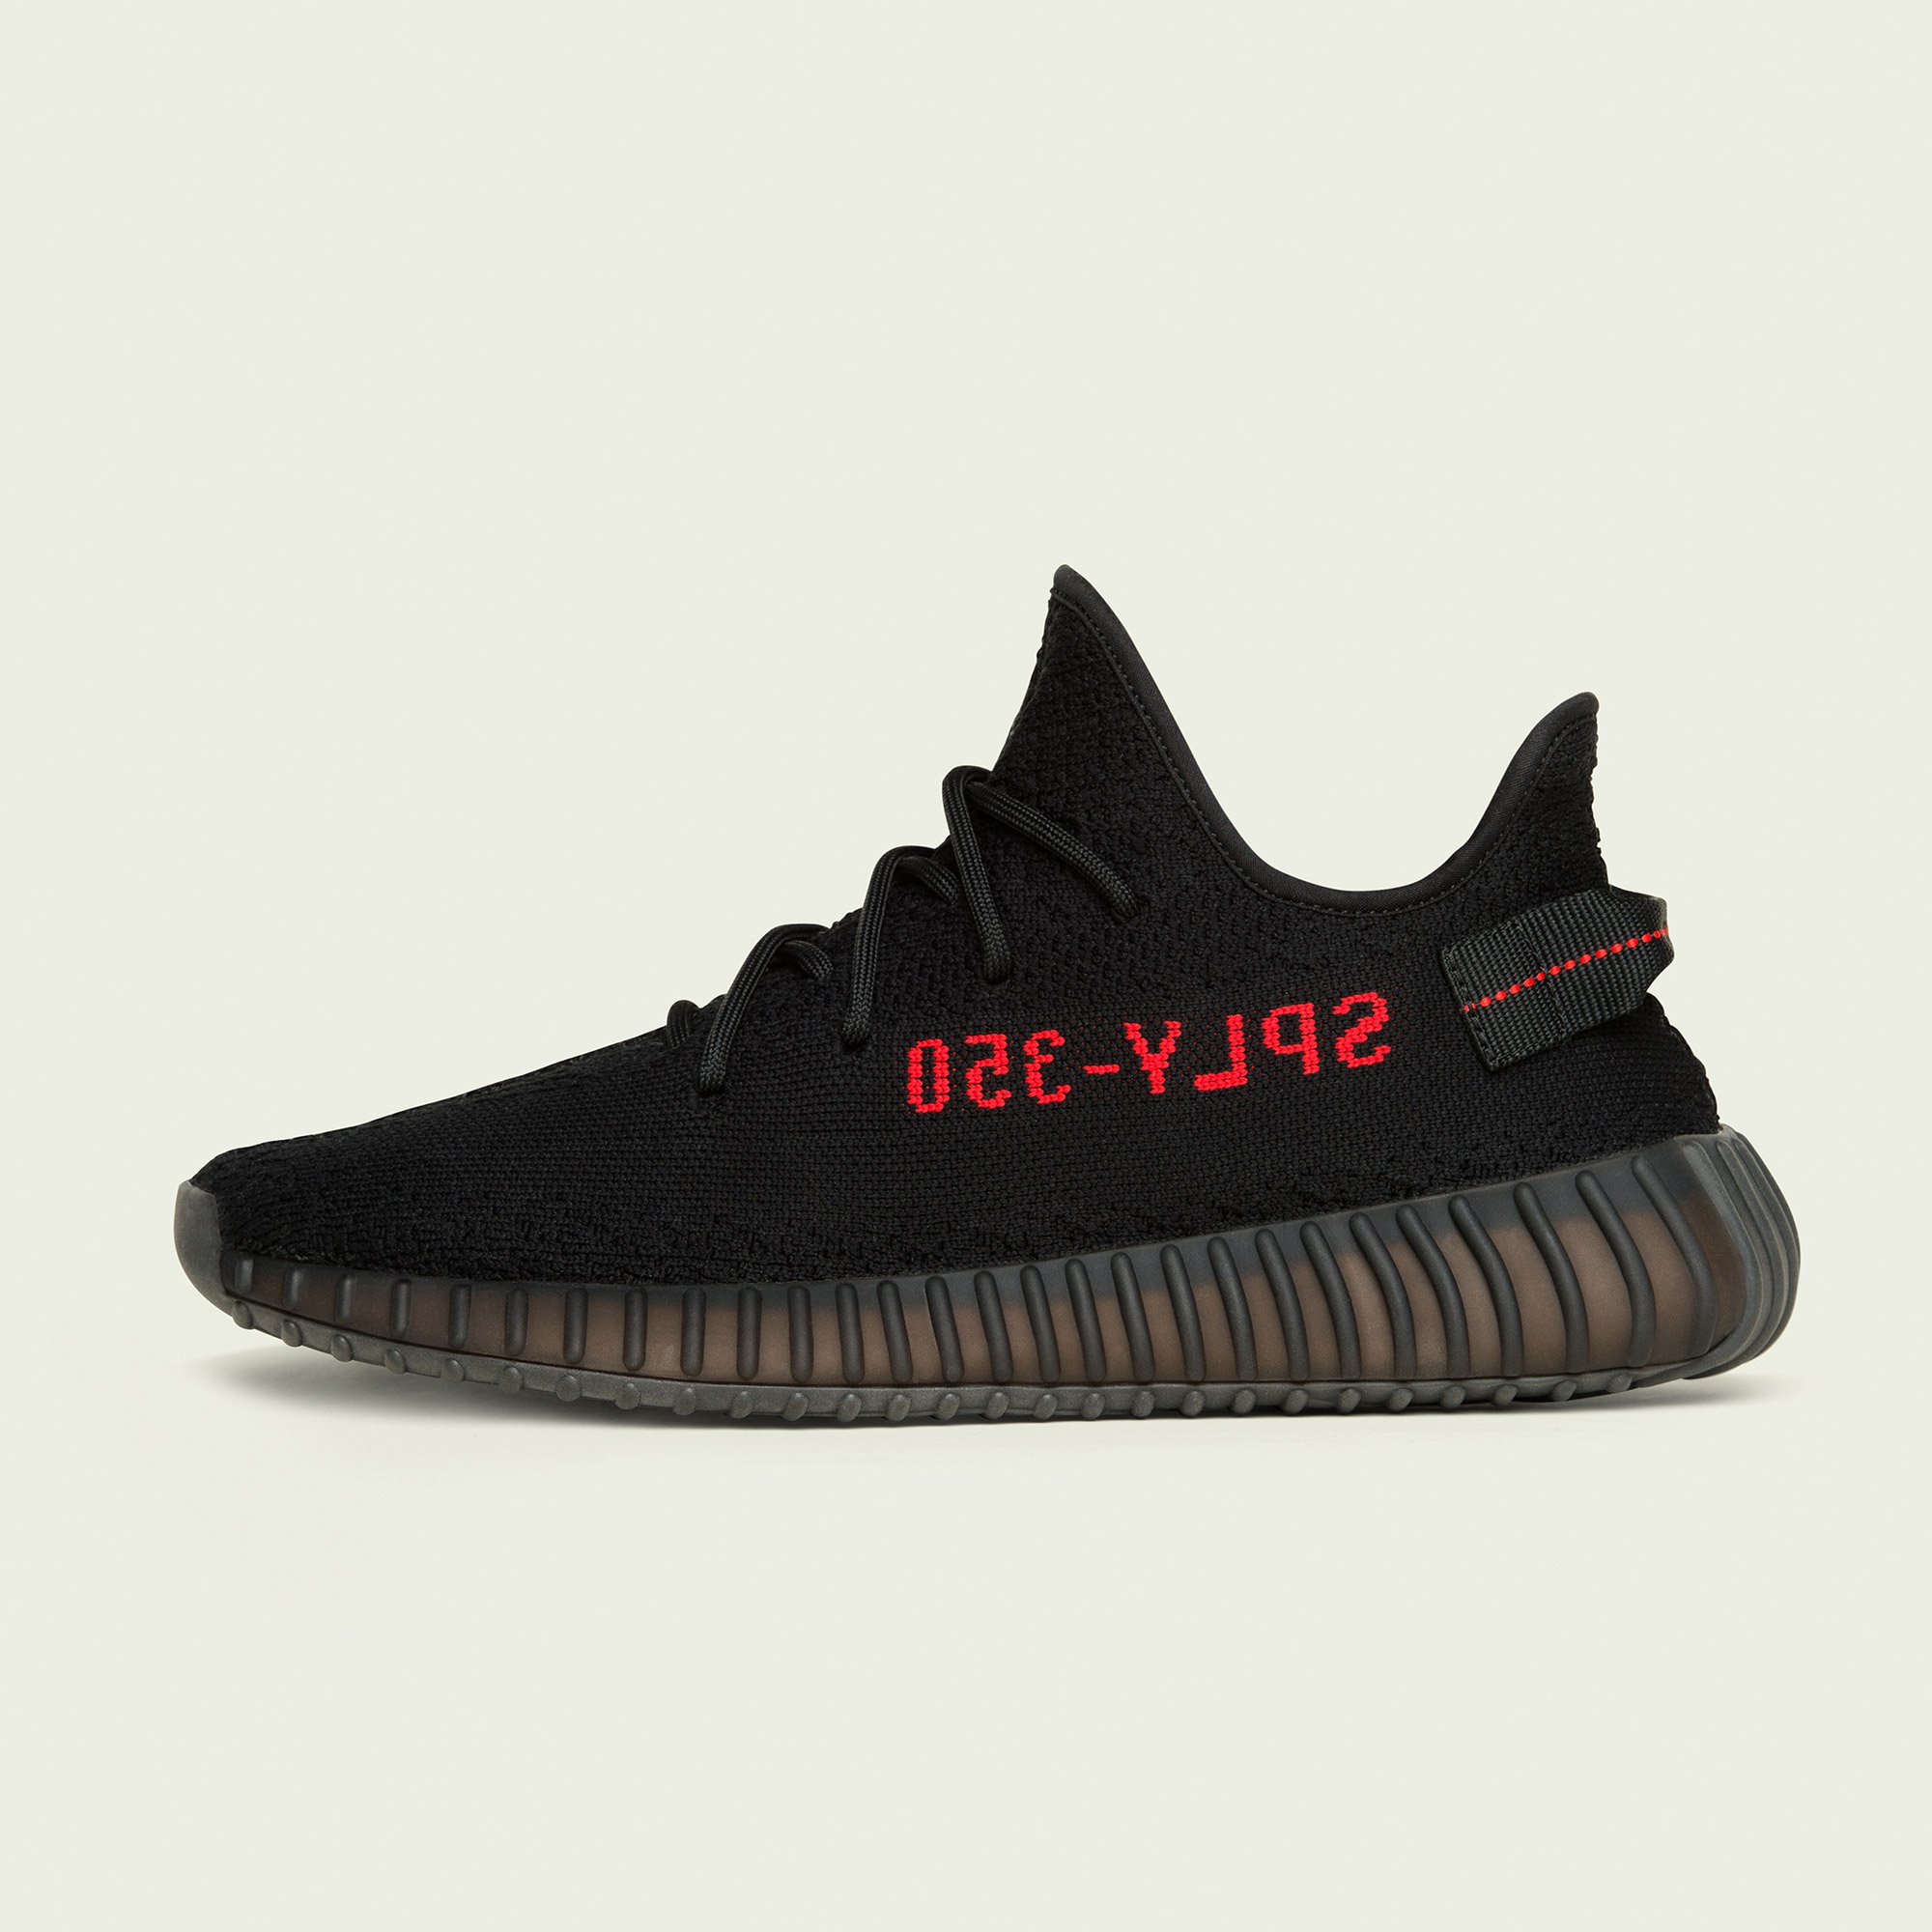 adidas-yeezy-boost-350-v2-core-black-red-3